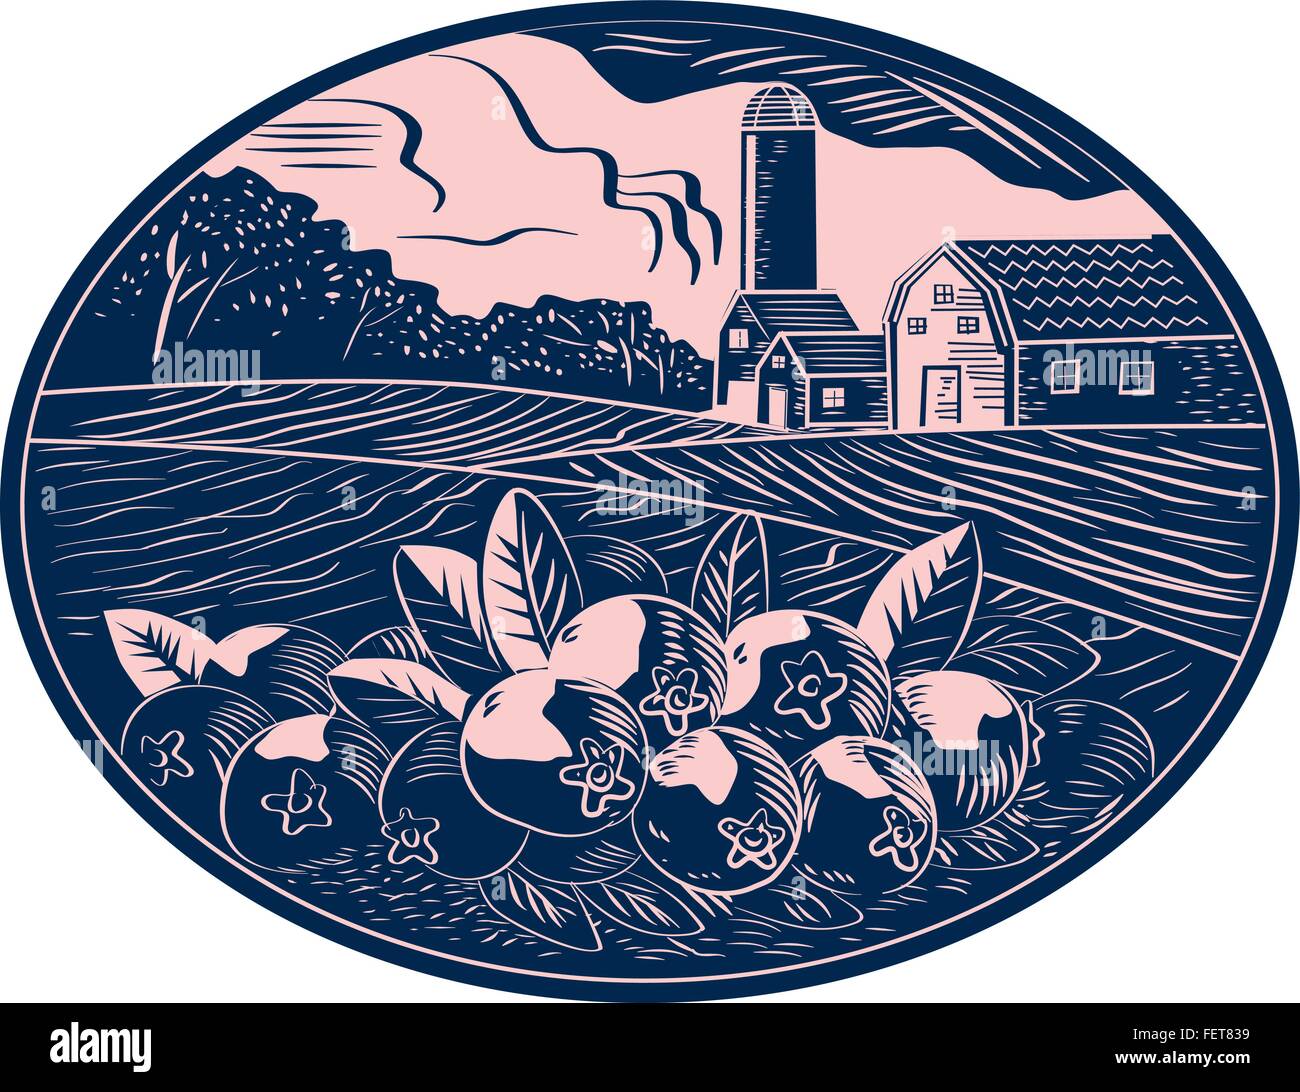 Illustration of a cranberry fruit farm with farmhouse barn and silo in the background done in retro woodcut style. Stock Vector